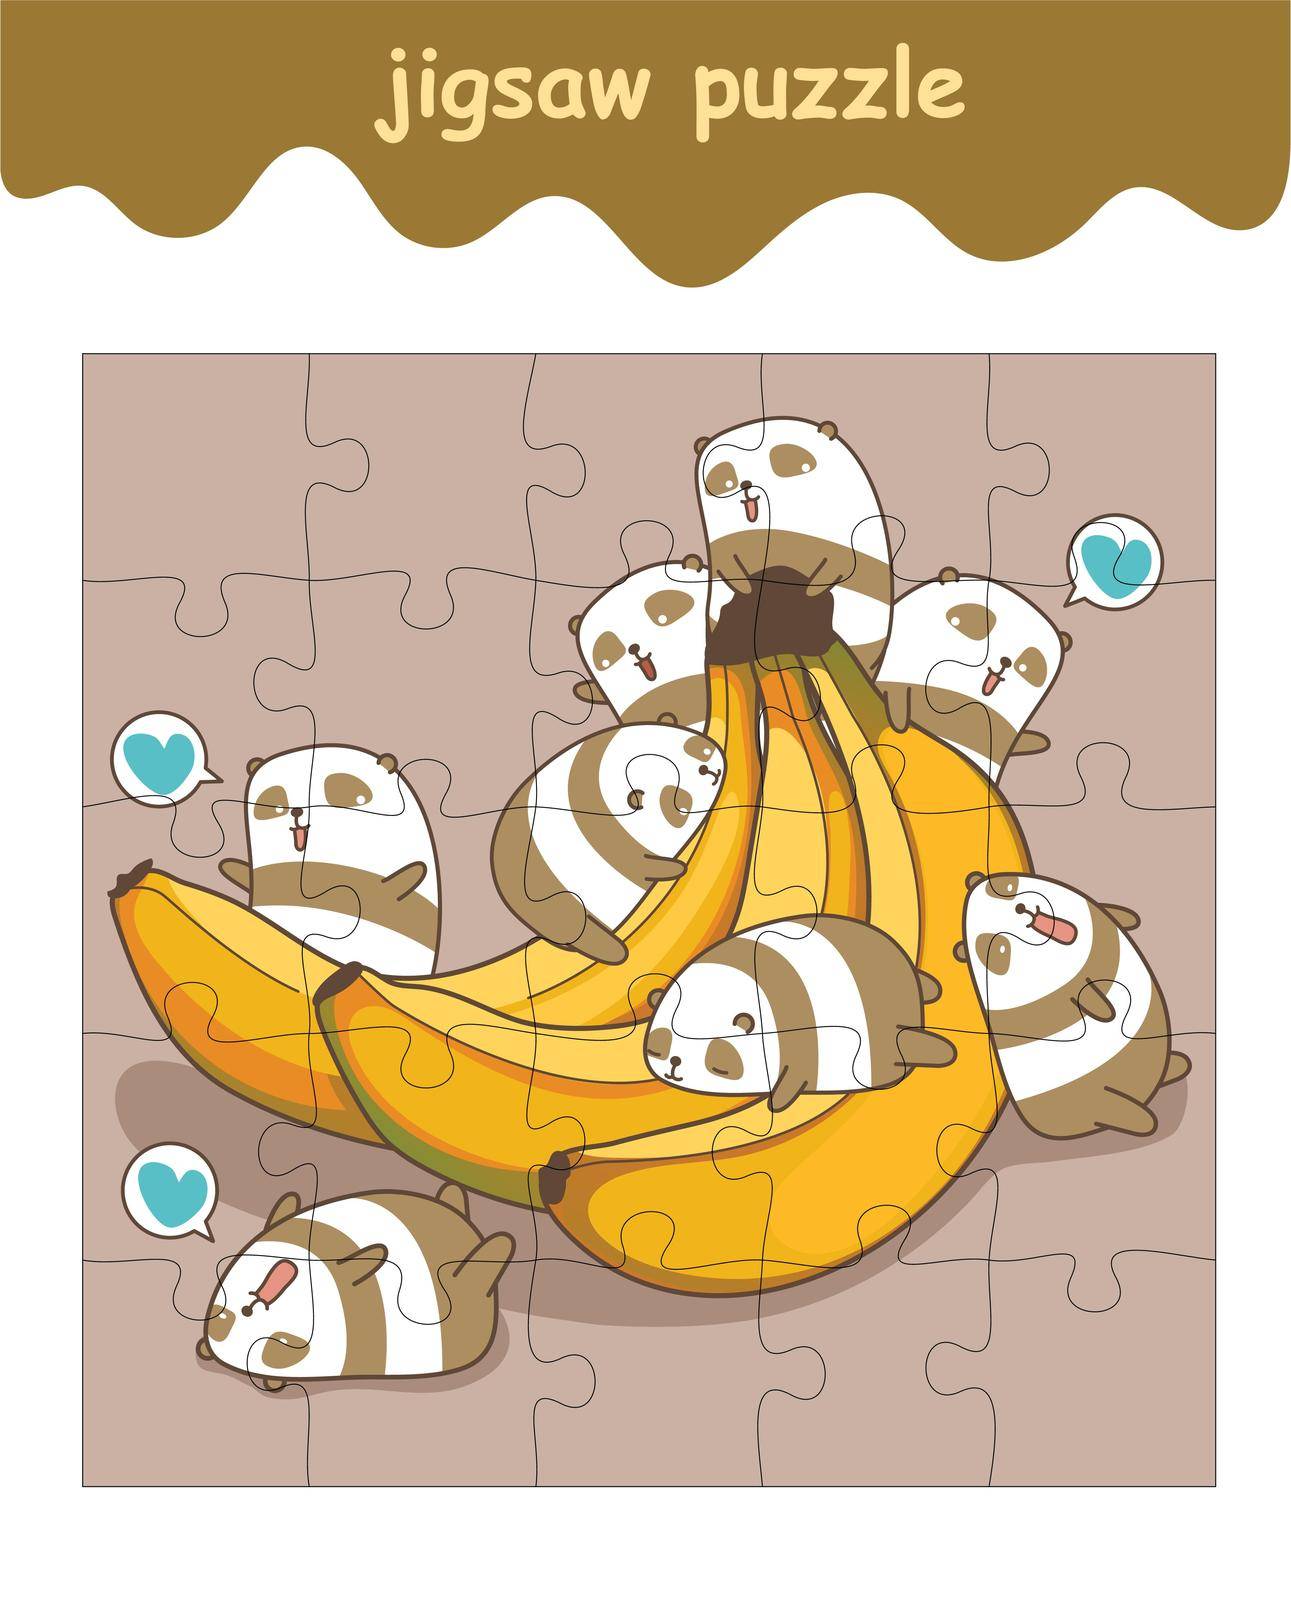 jigsaw puzzle game of little pandas with banana by valueinvestor